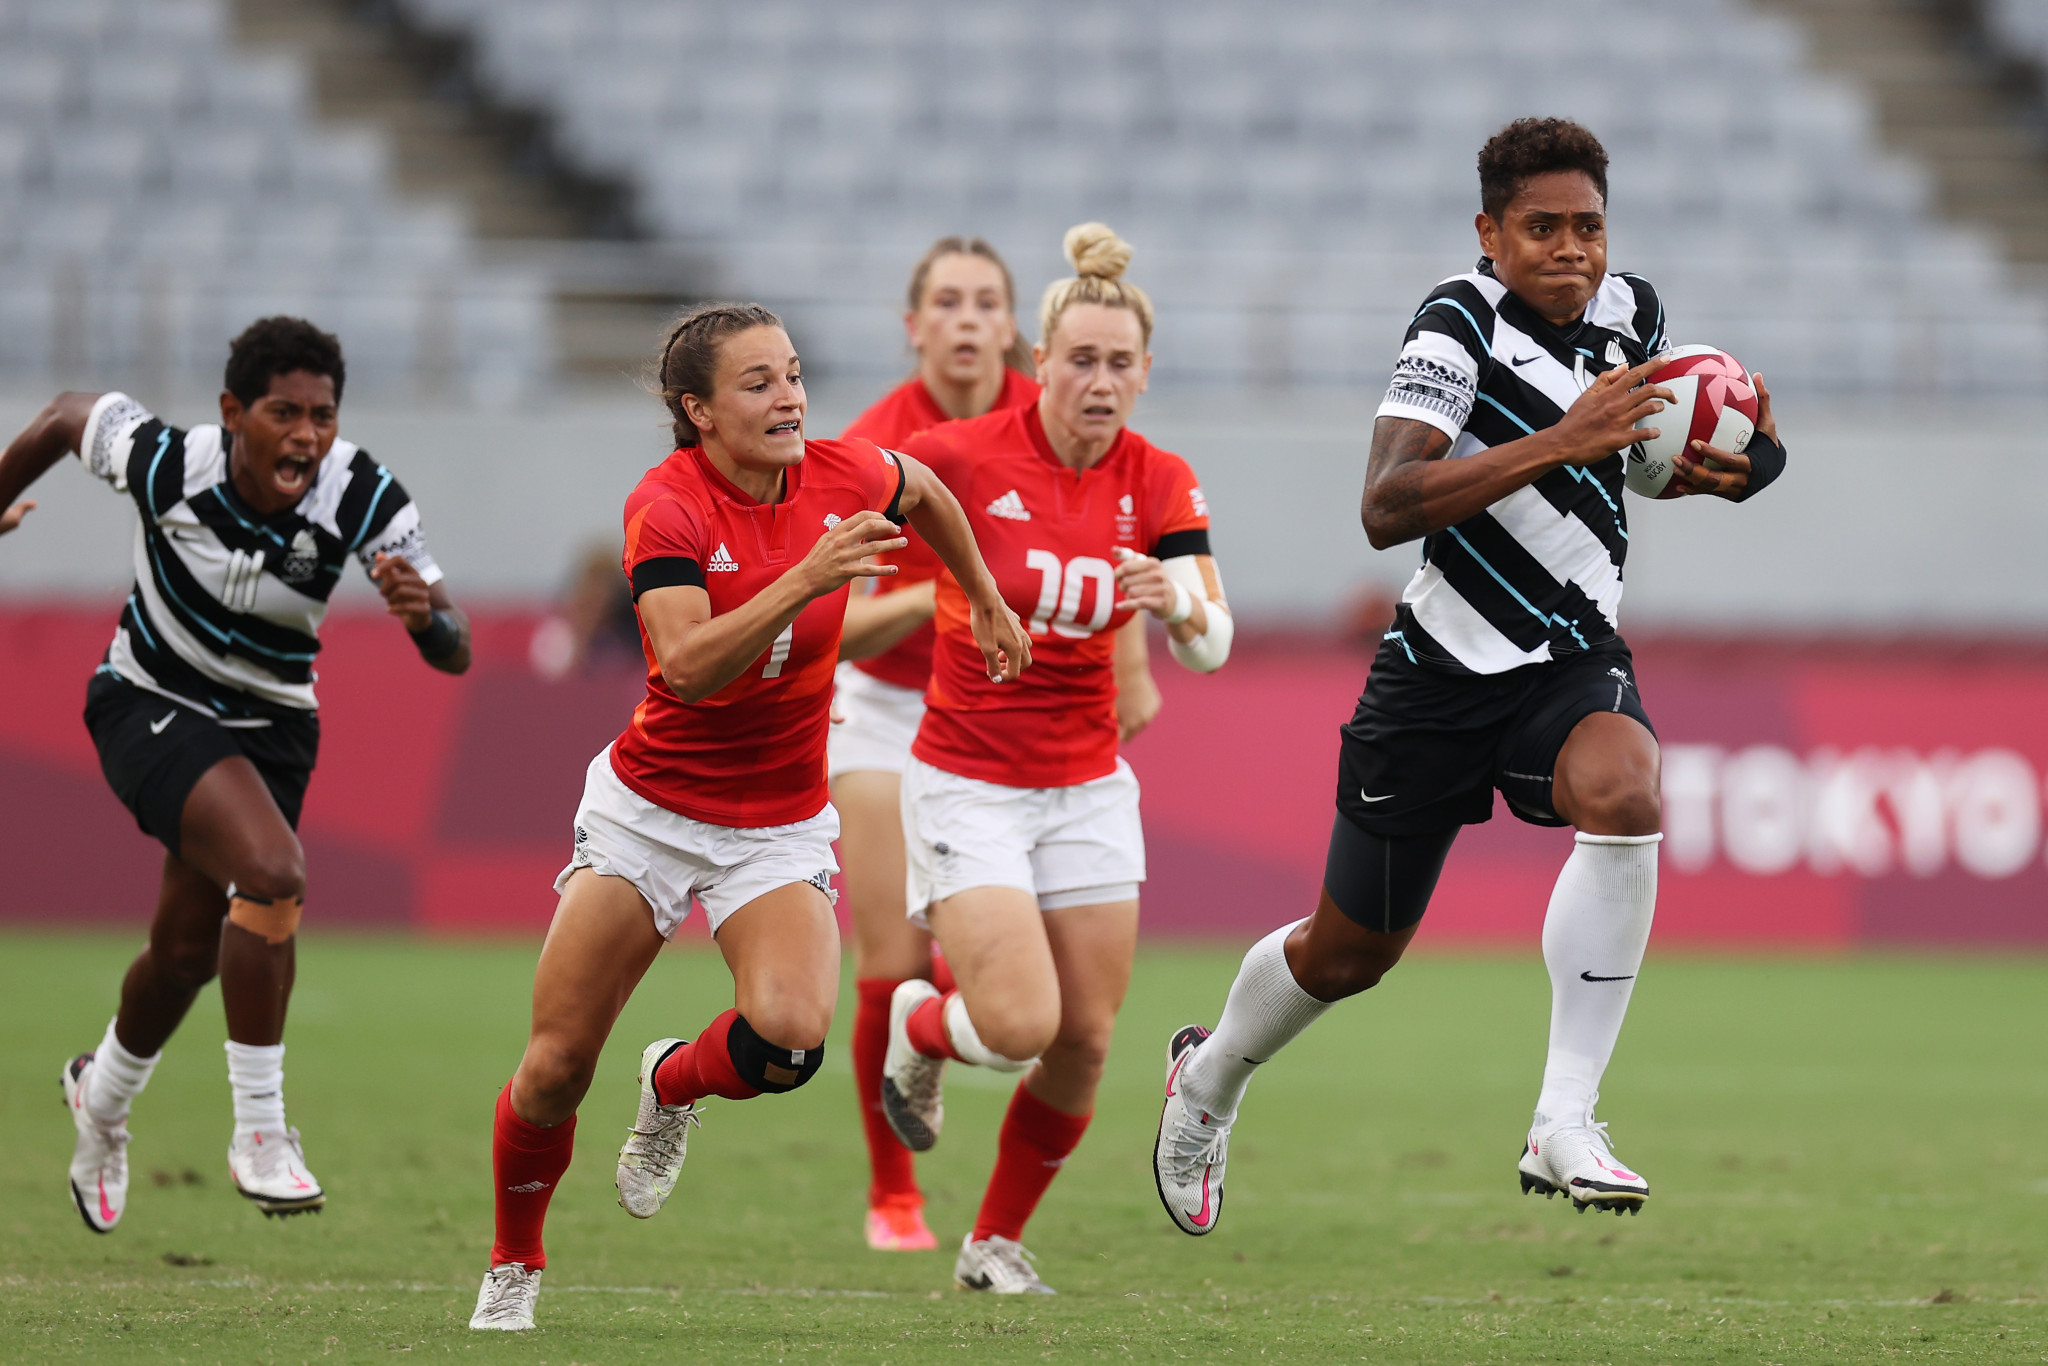 Three nations to miss World Rugby Sevens Series events in Spain due to COVID-19